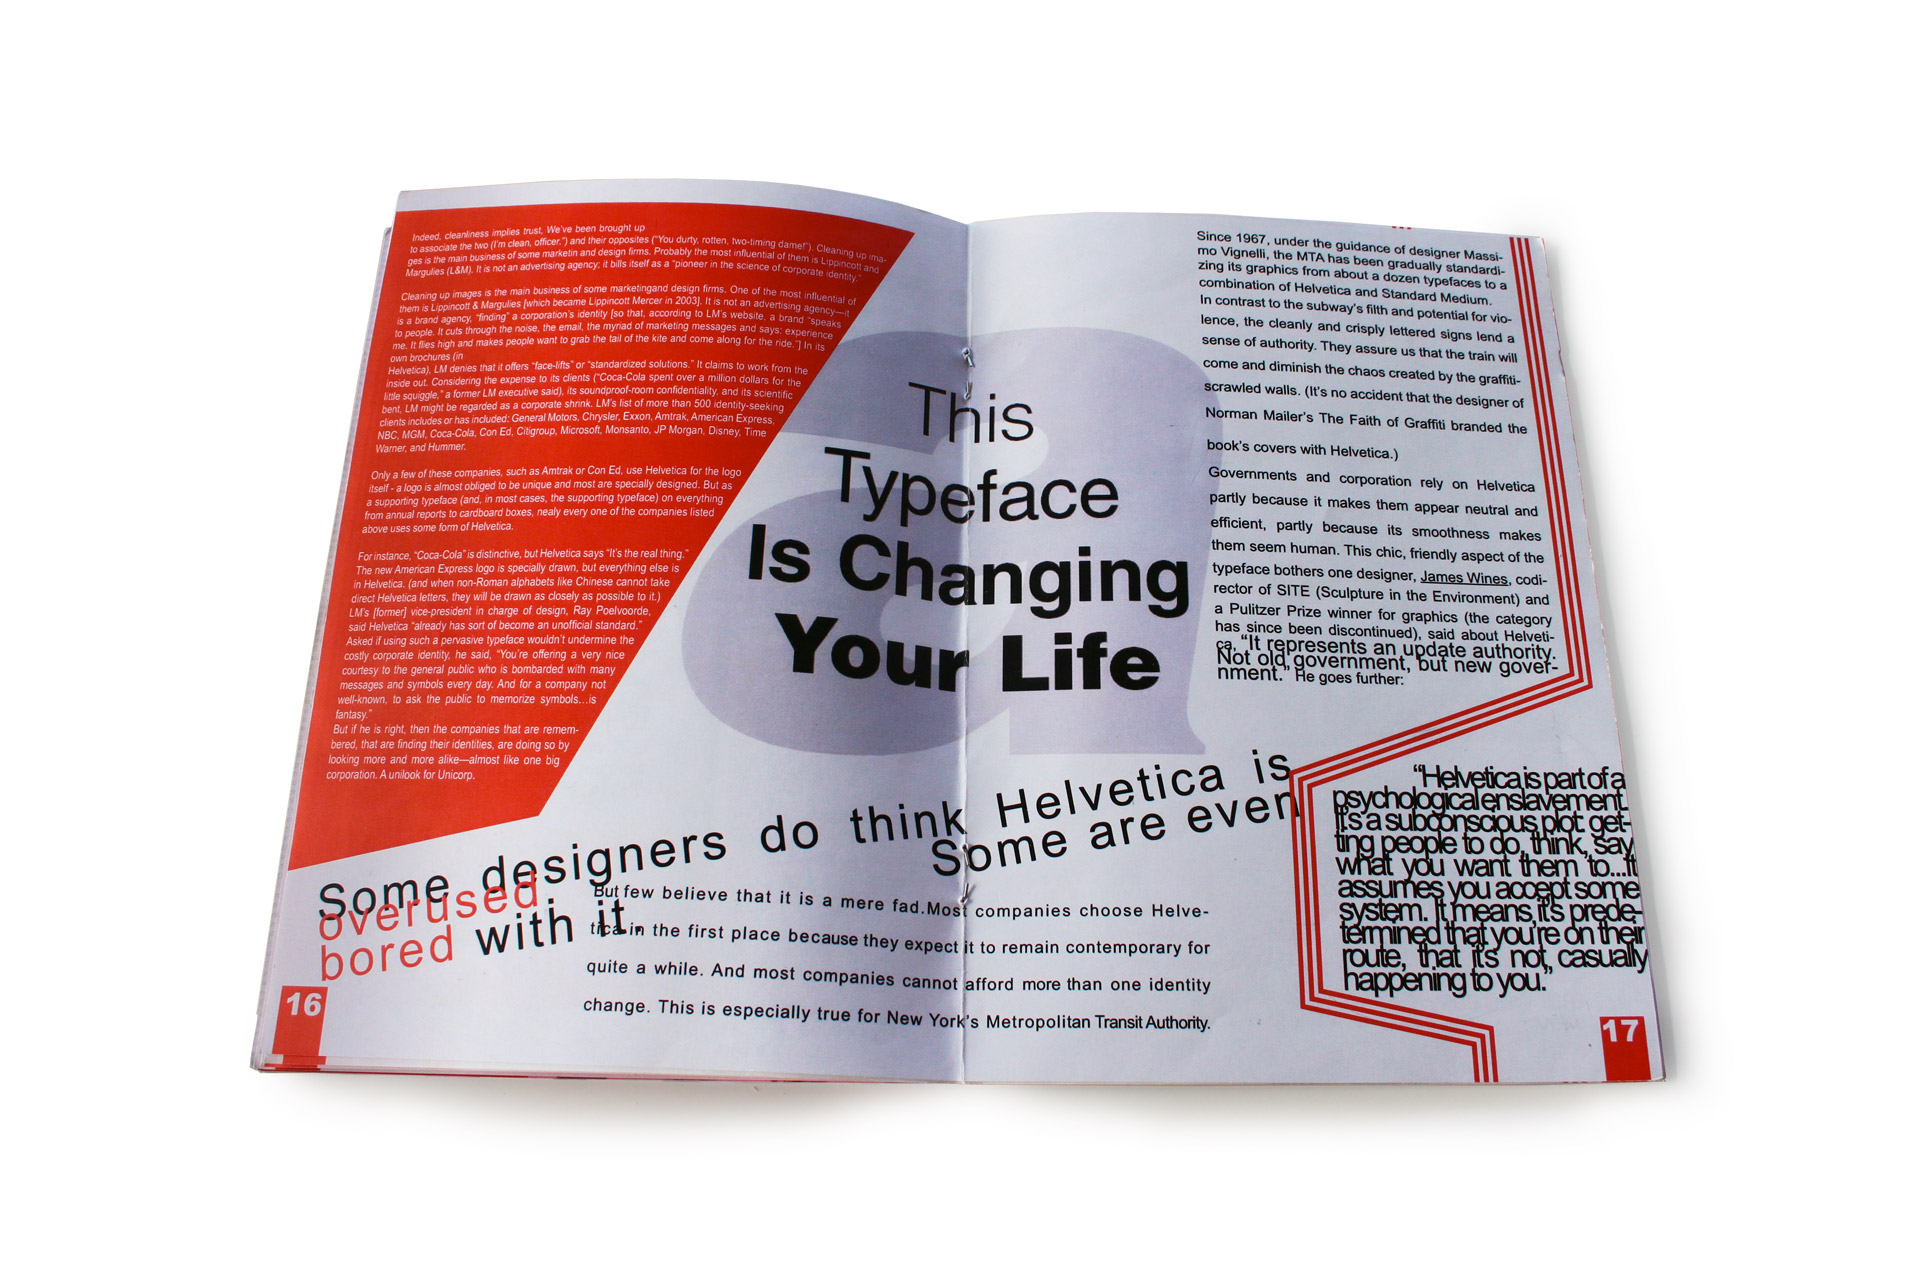 About Typography - Helvetica